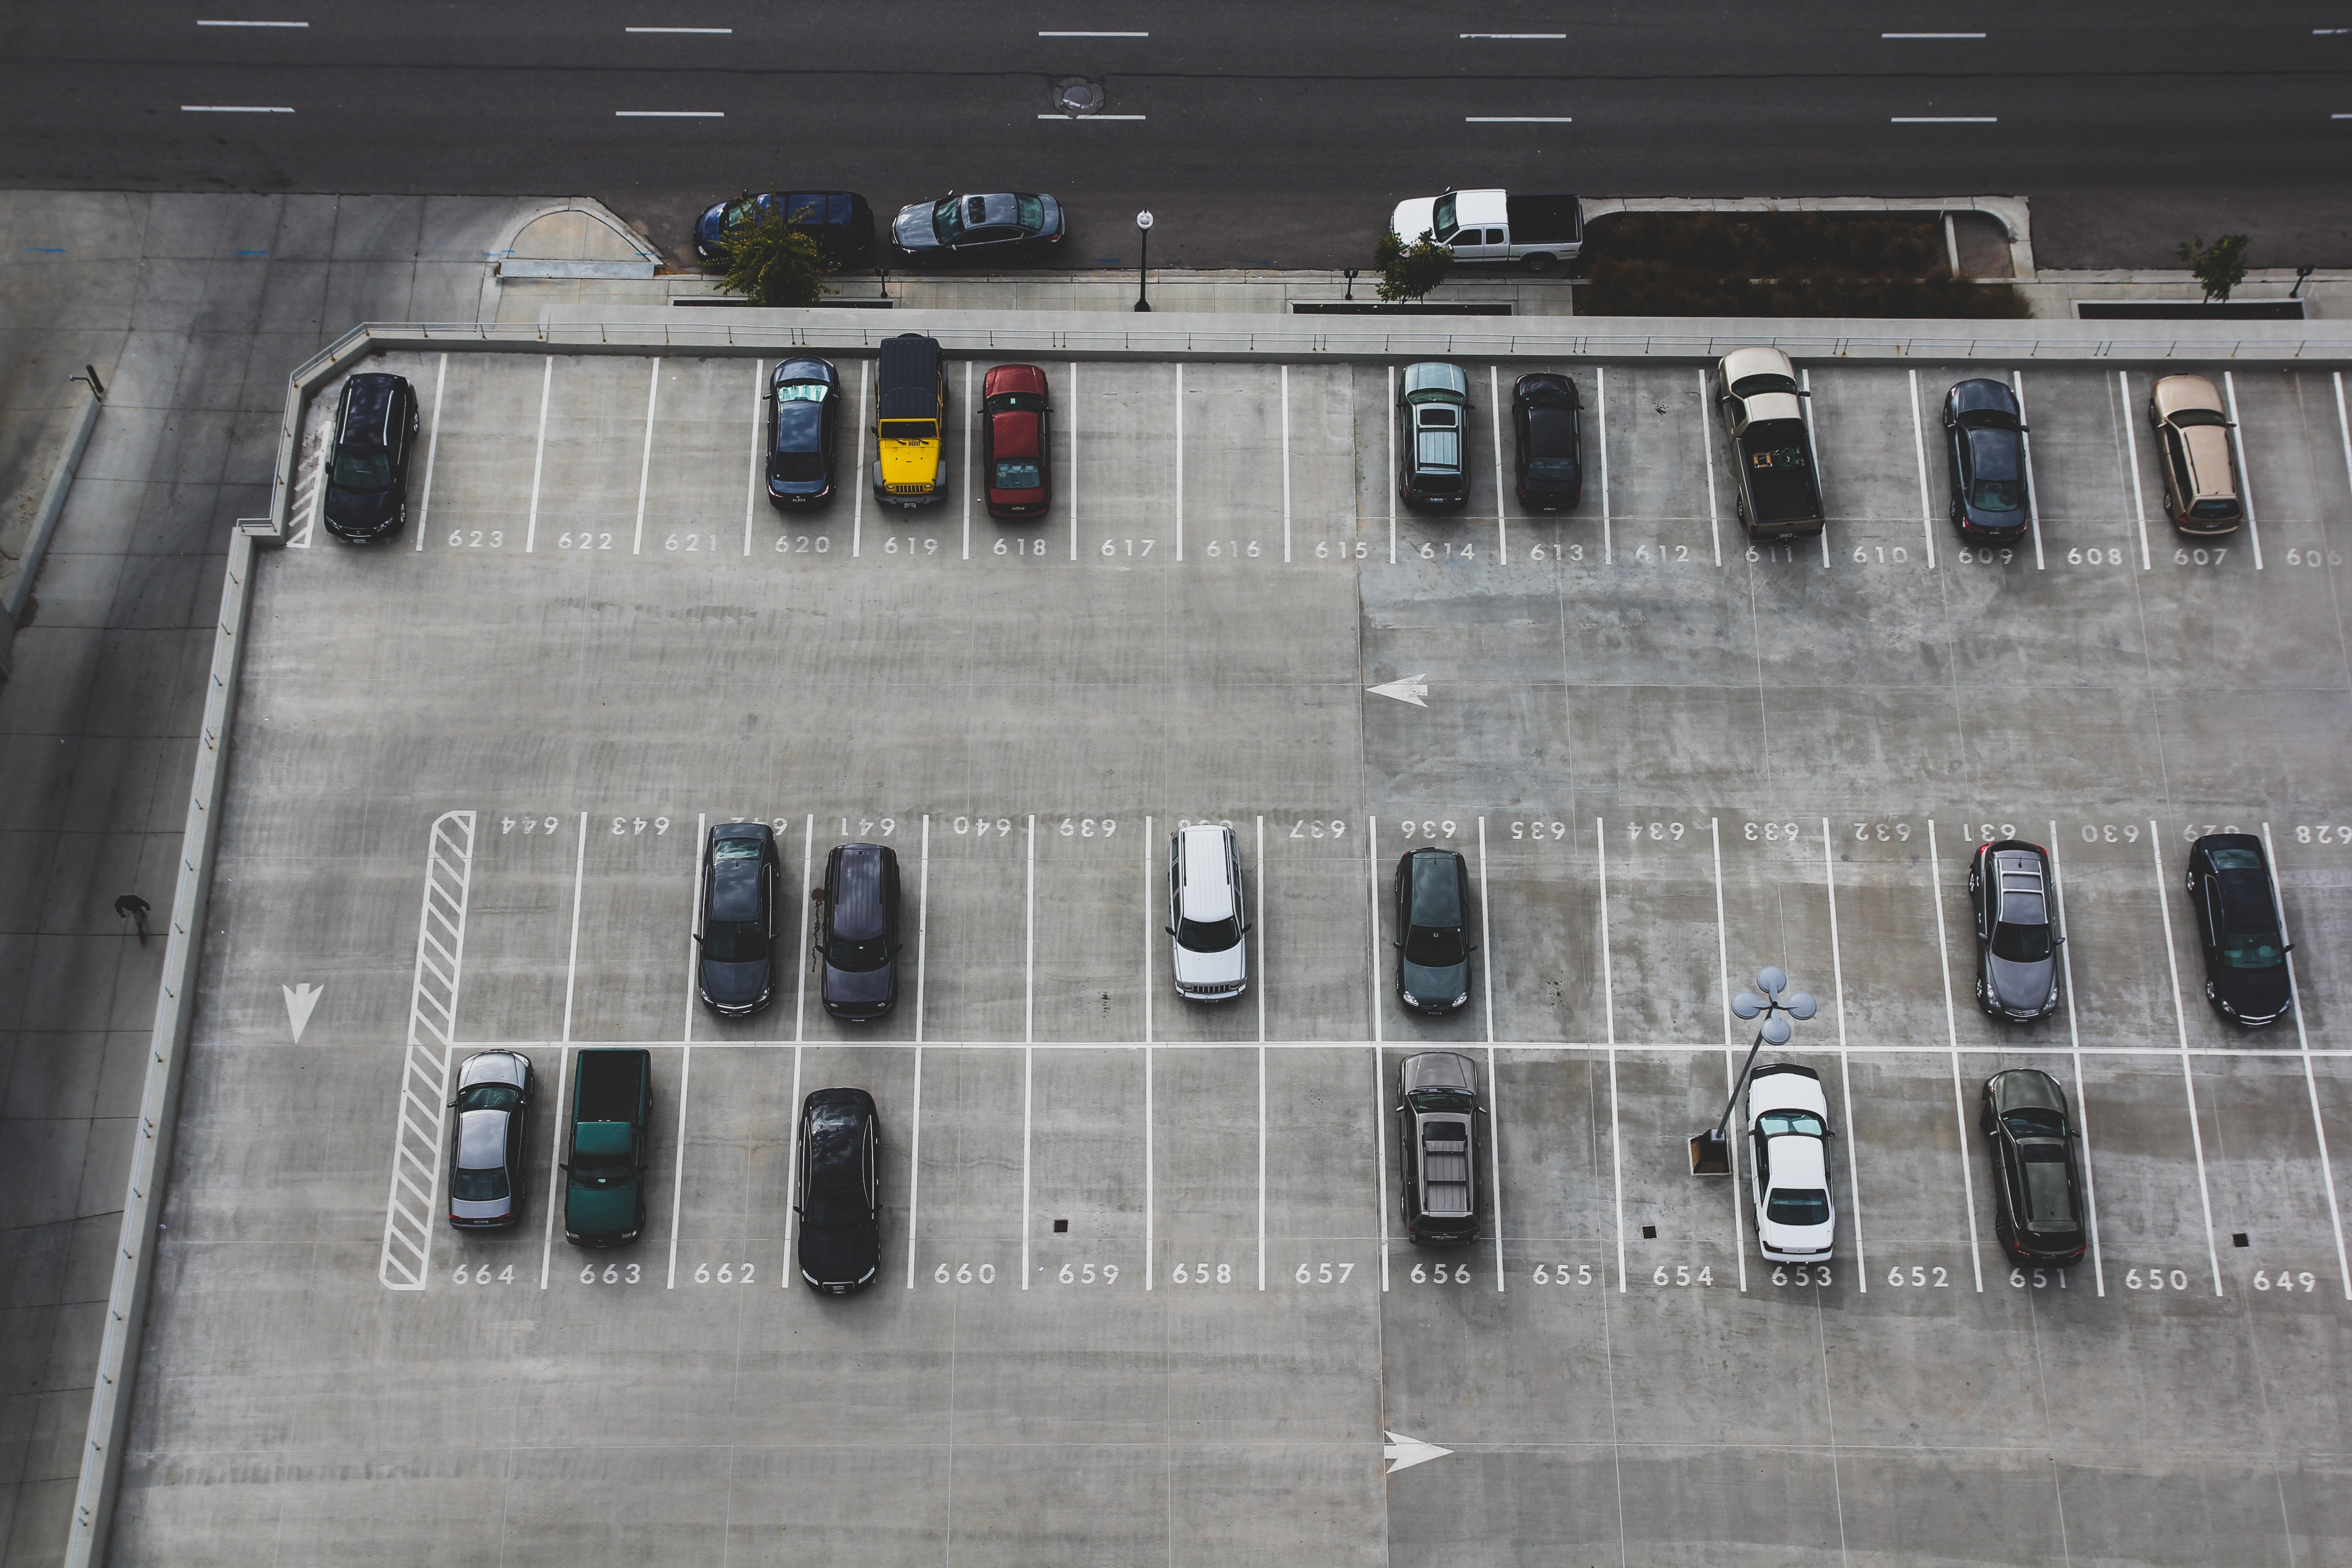 Computer vision used for parking occupancy detection.